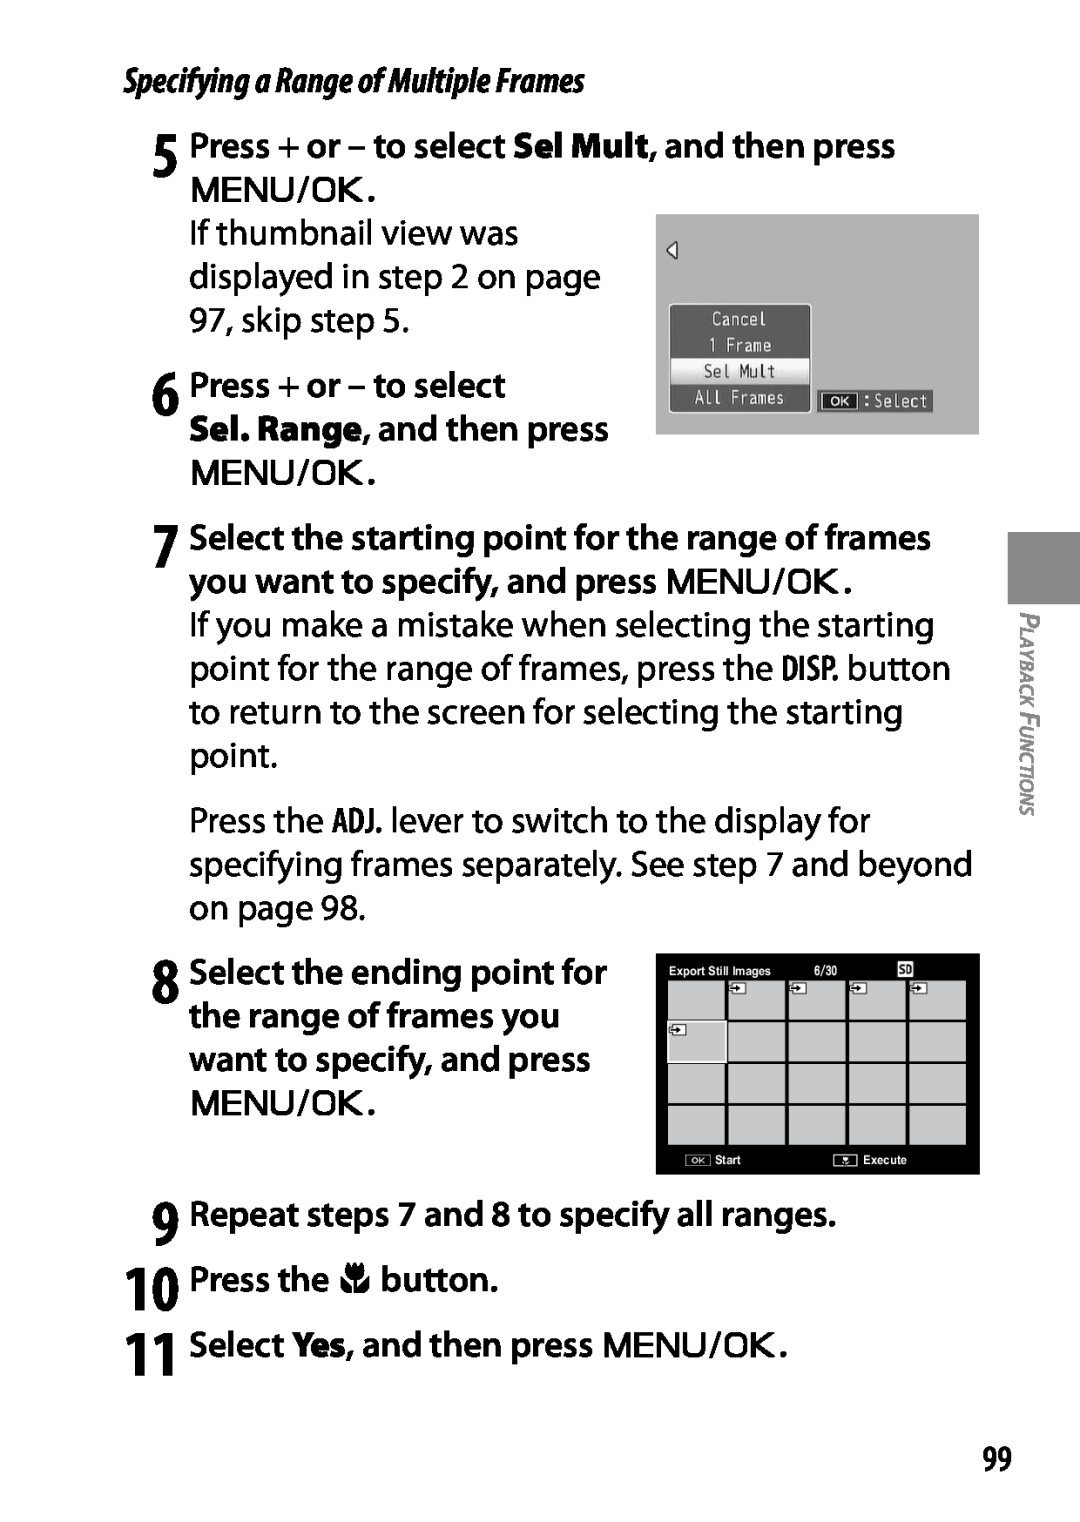 Ricoh GXR Press + or - to select Sel. Range, and then press C/D, Select Yes, and then press C/D, Export StillImages, Start 